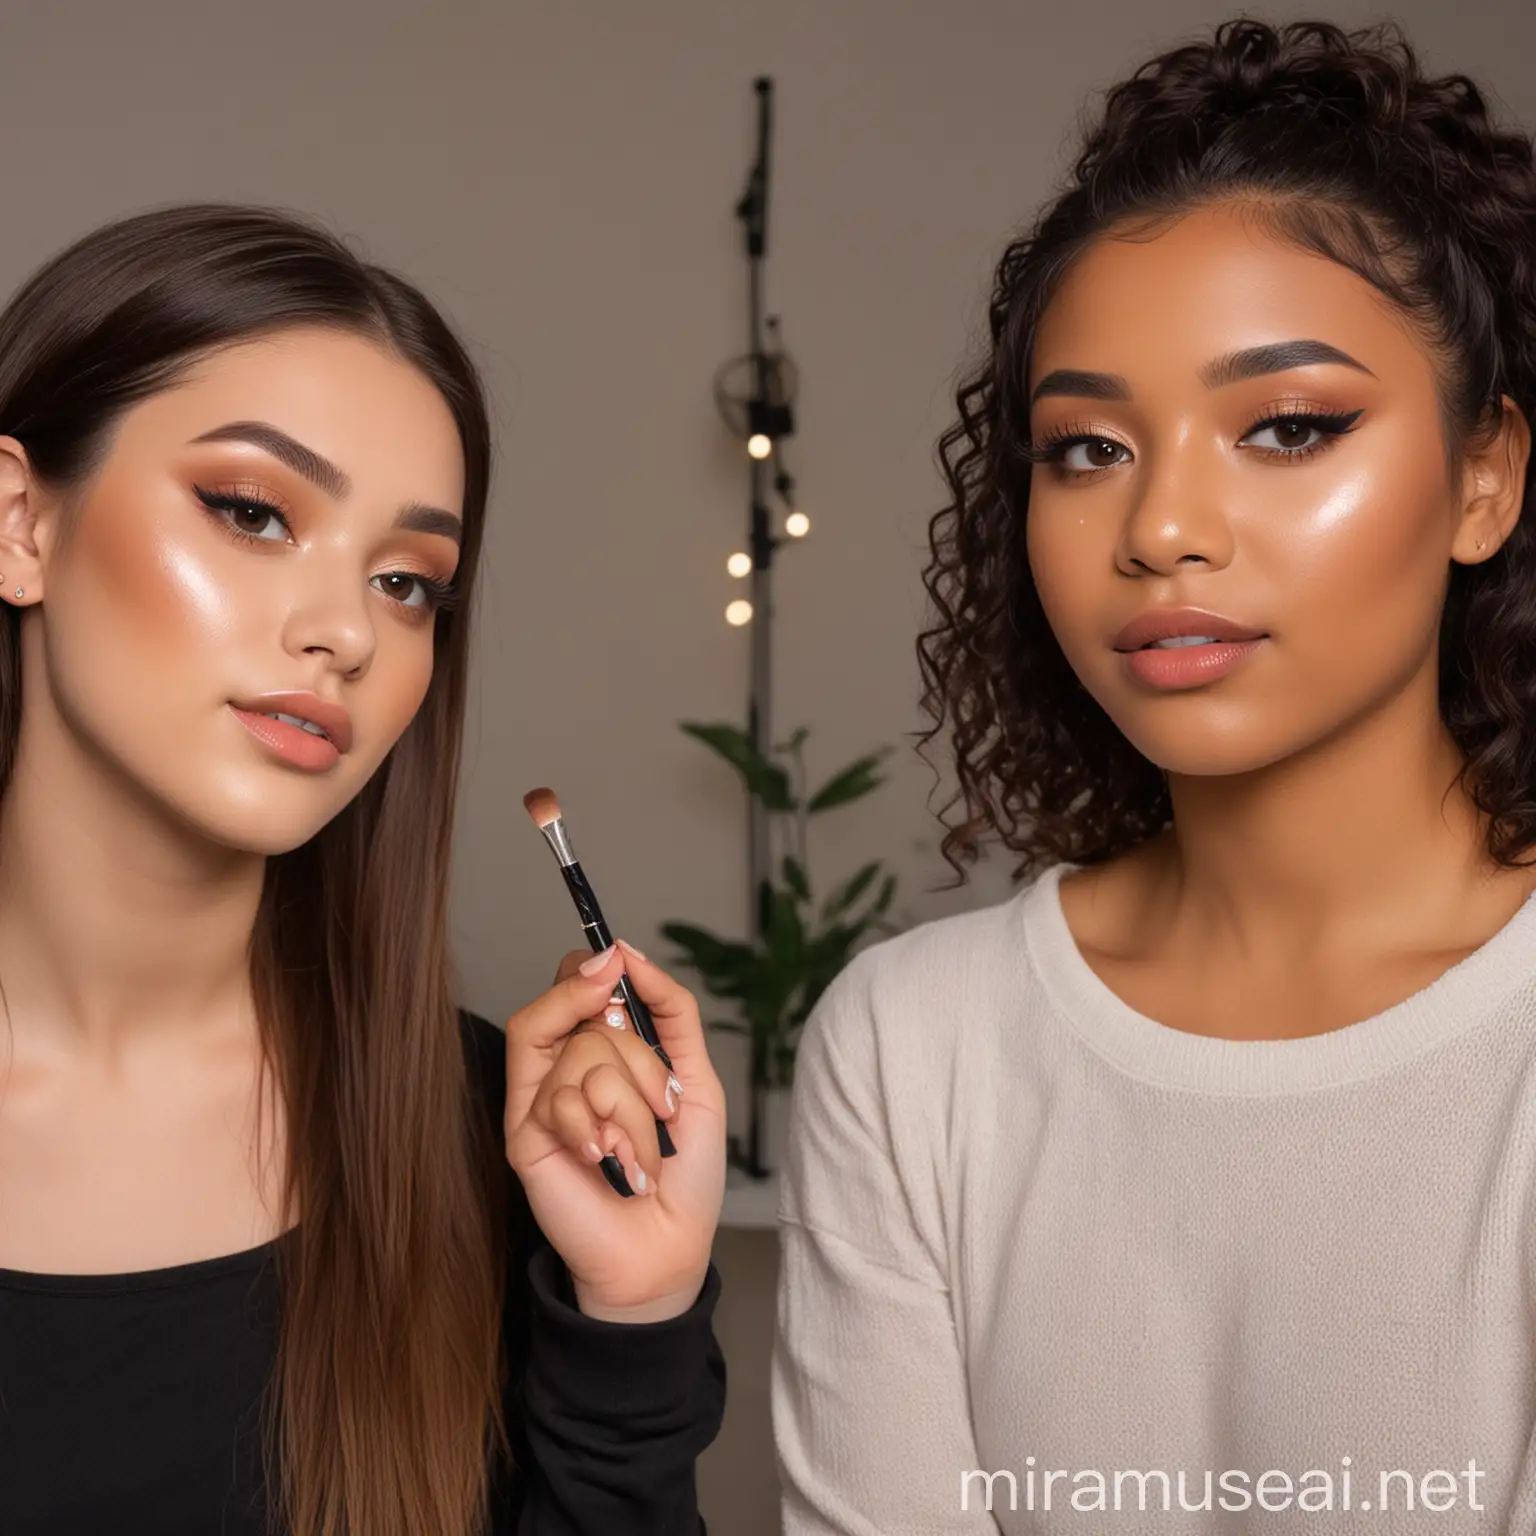 two 20 year old females of different ethnicities filming a makeup tutorial for their social media accounts